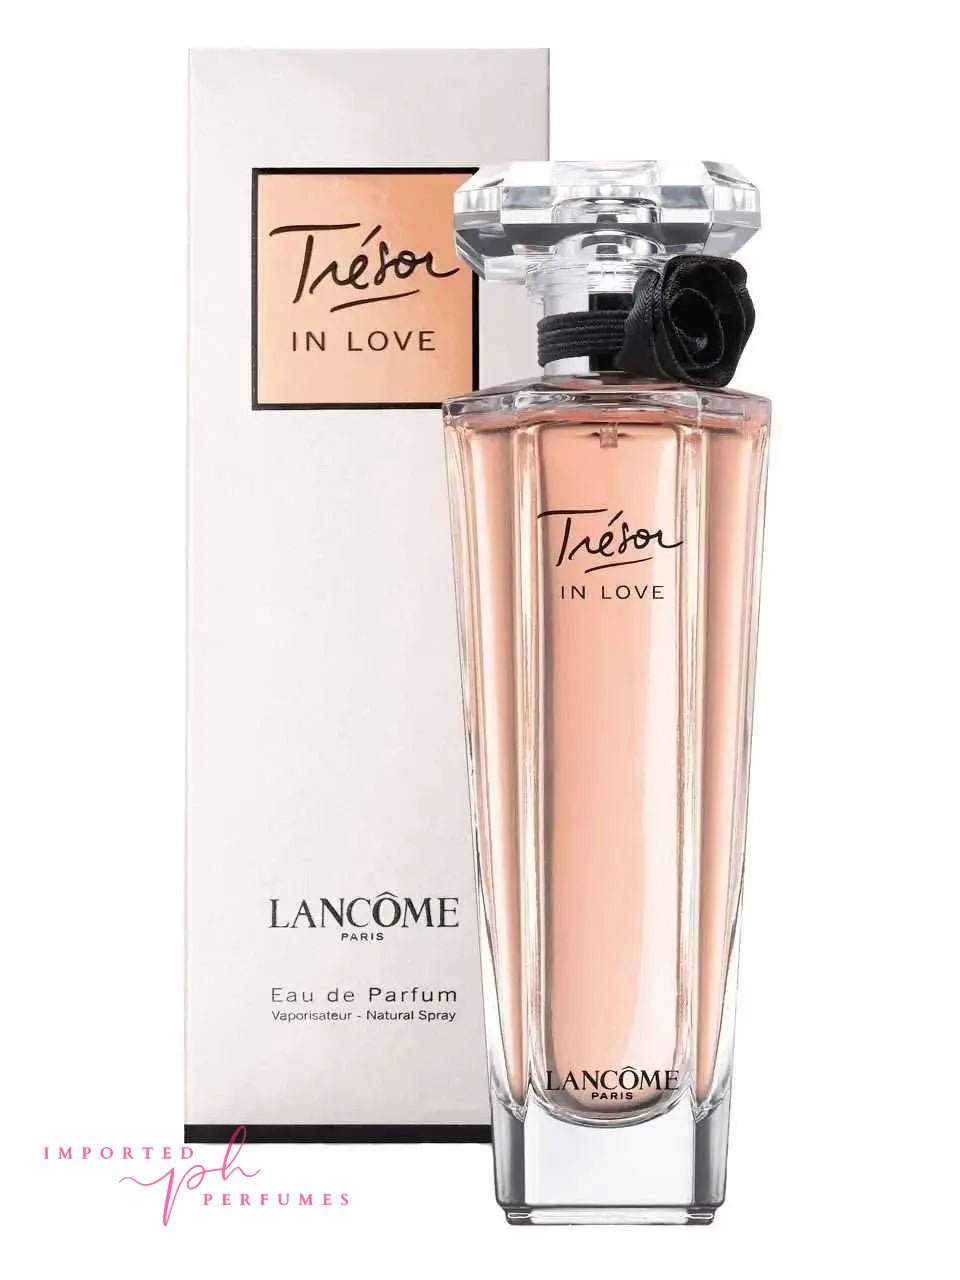 [TESTER] Tresor In Love By Lancome Paris For Women 75ml-Imported Perfumes Co-75ml,Lancome,paris,test,TESTER,women